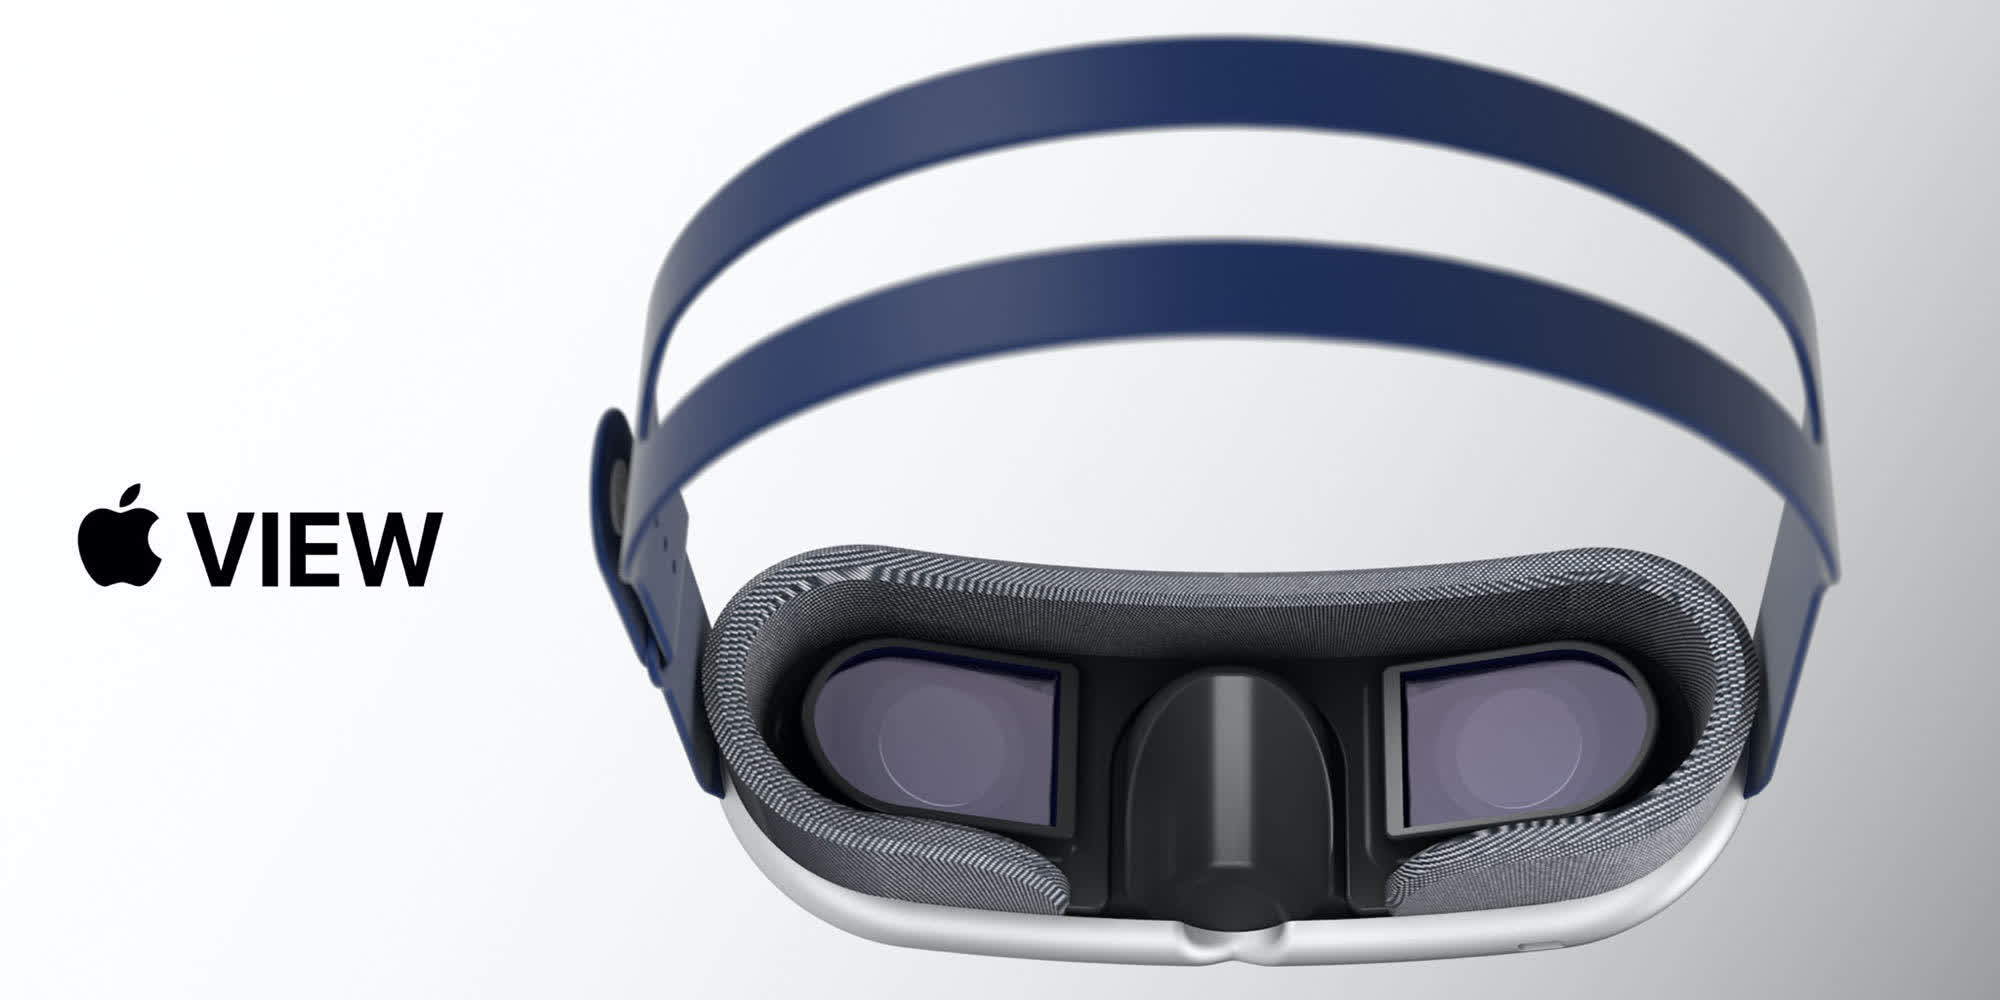 Apple's mixed reality headset could have Mac-level performance